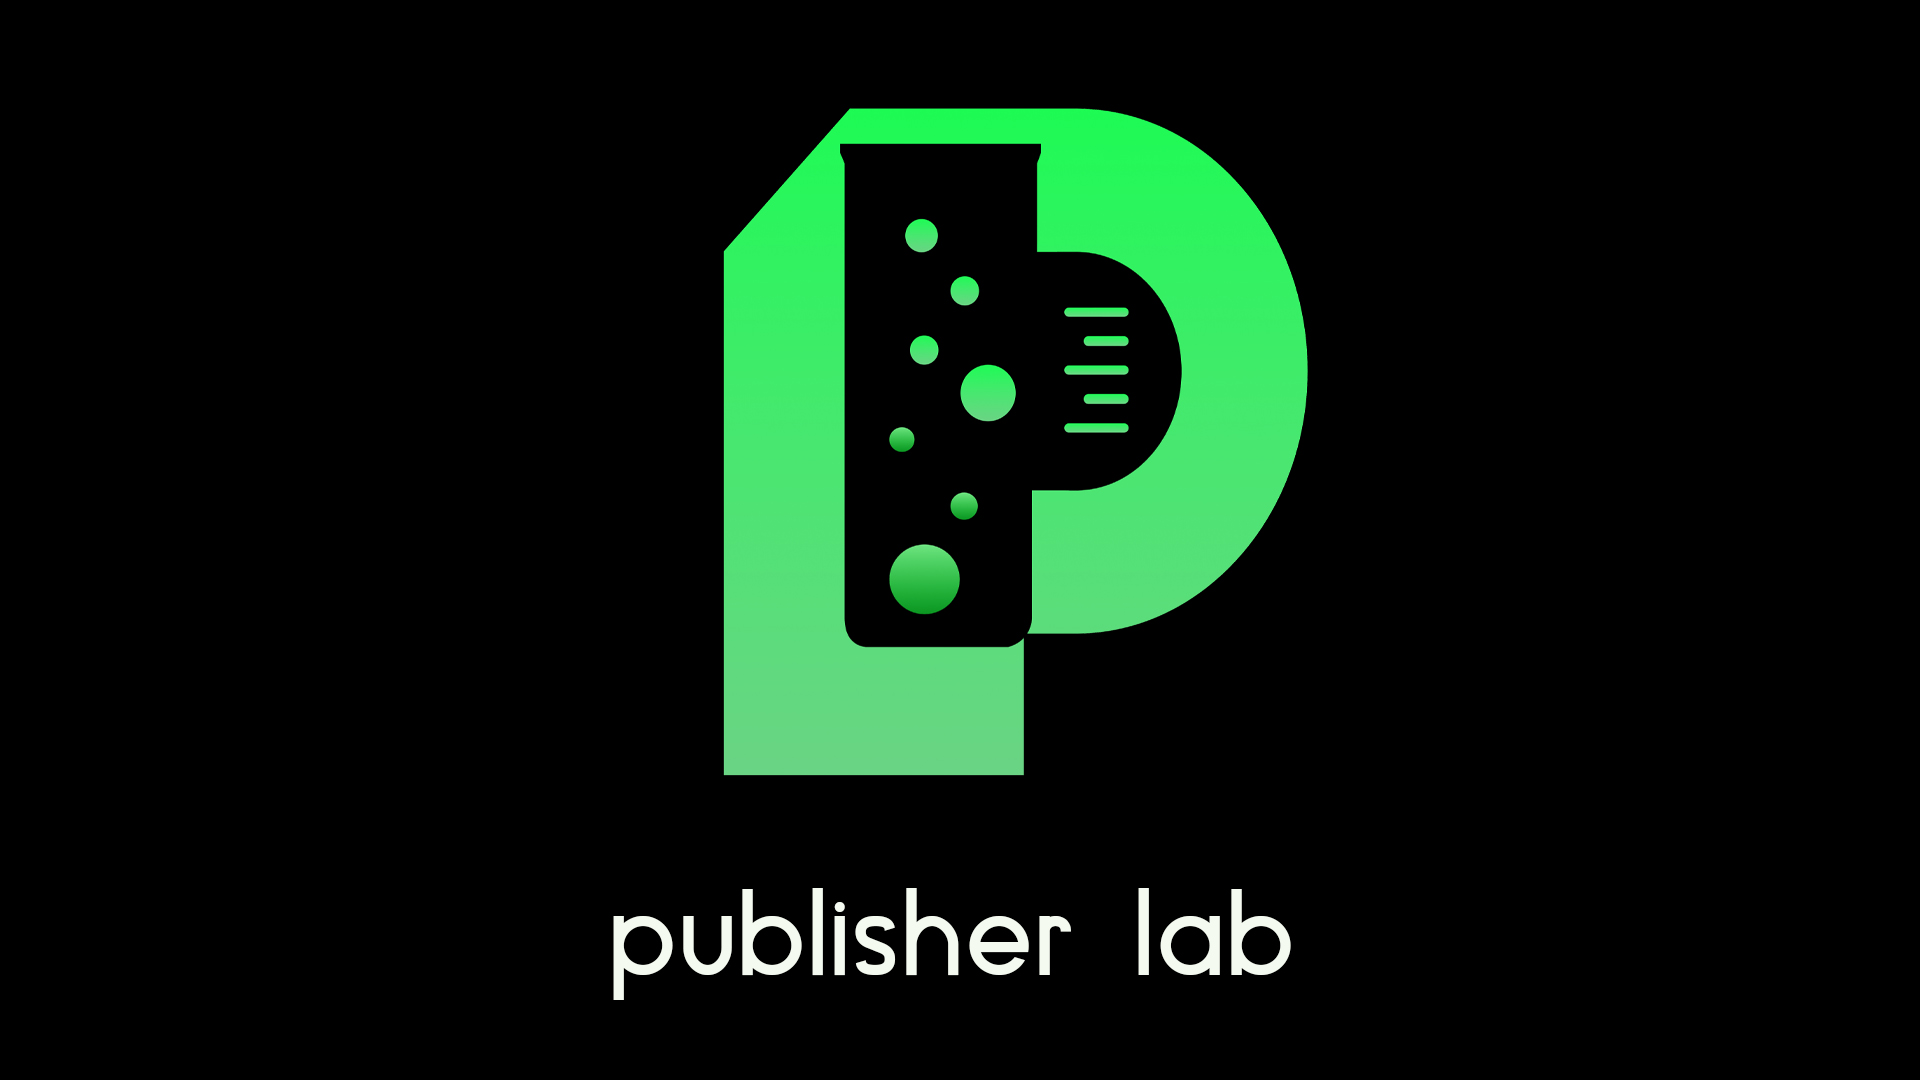 The Publisher Lab: a new era of search and AI, plus a Google antitrust lawsuit